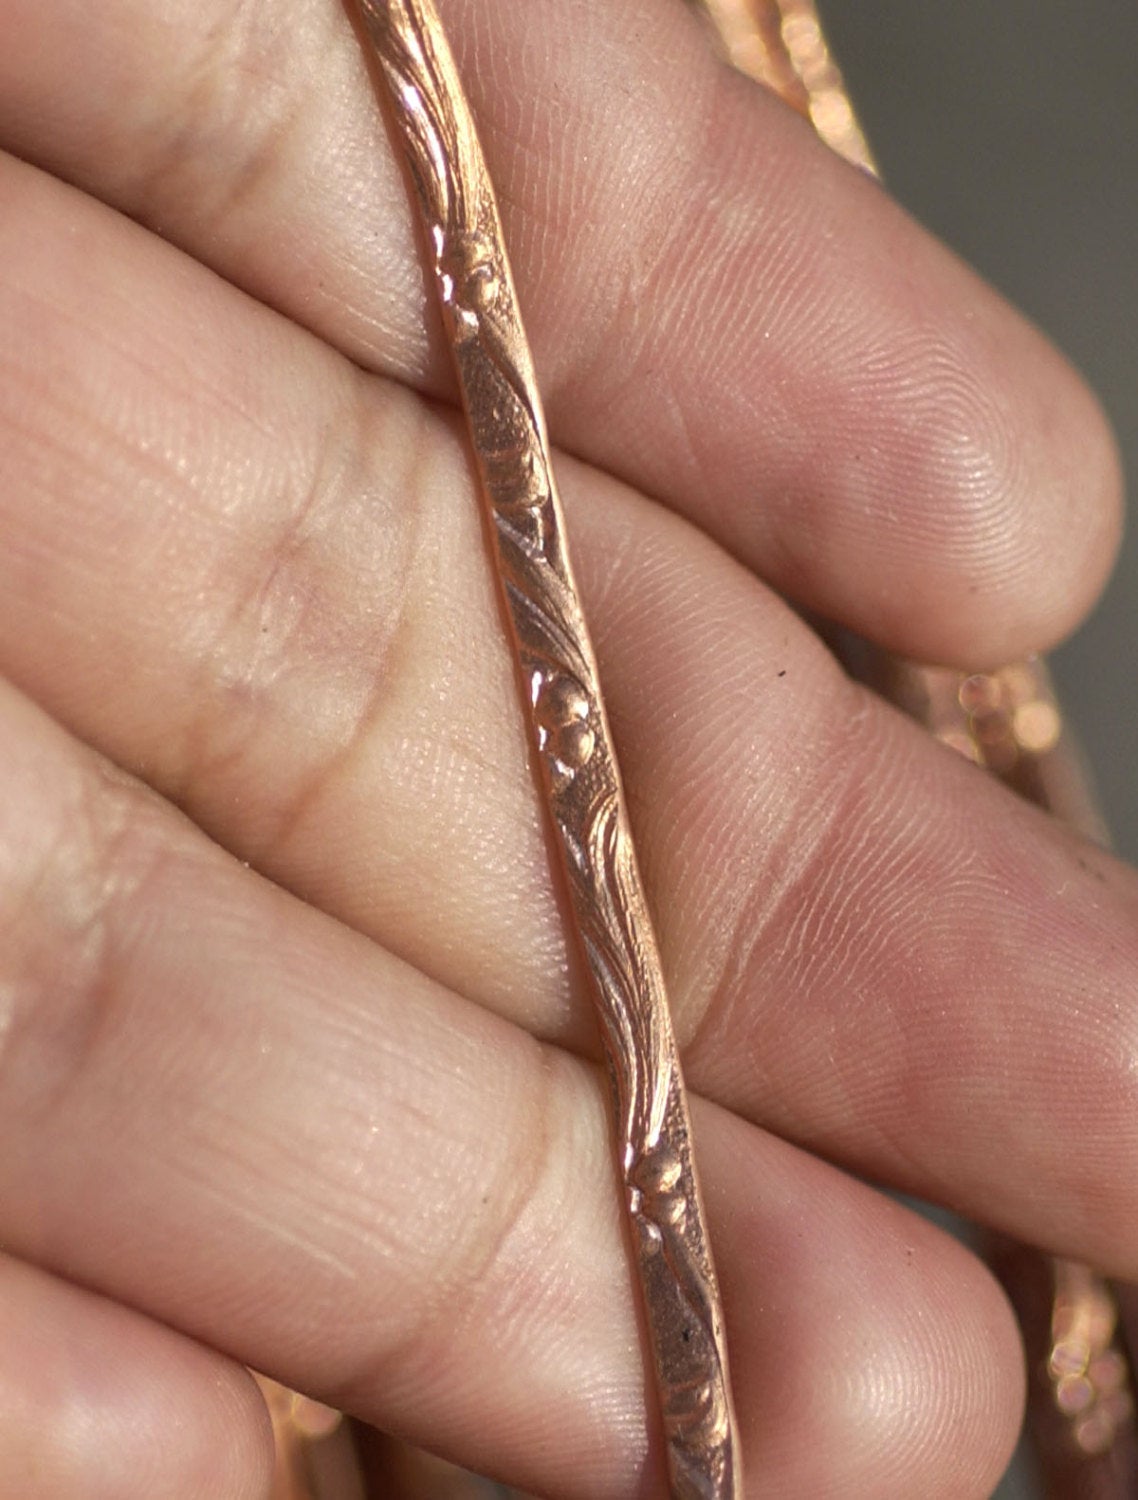 Copper Ring Stock Shank 2.8mm Daisys Textured Metal Cane Wire - Rings Bracelets Pendants Metalwork